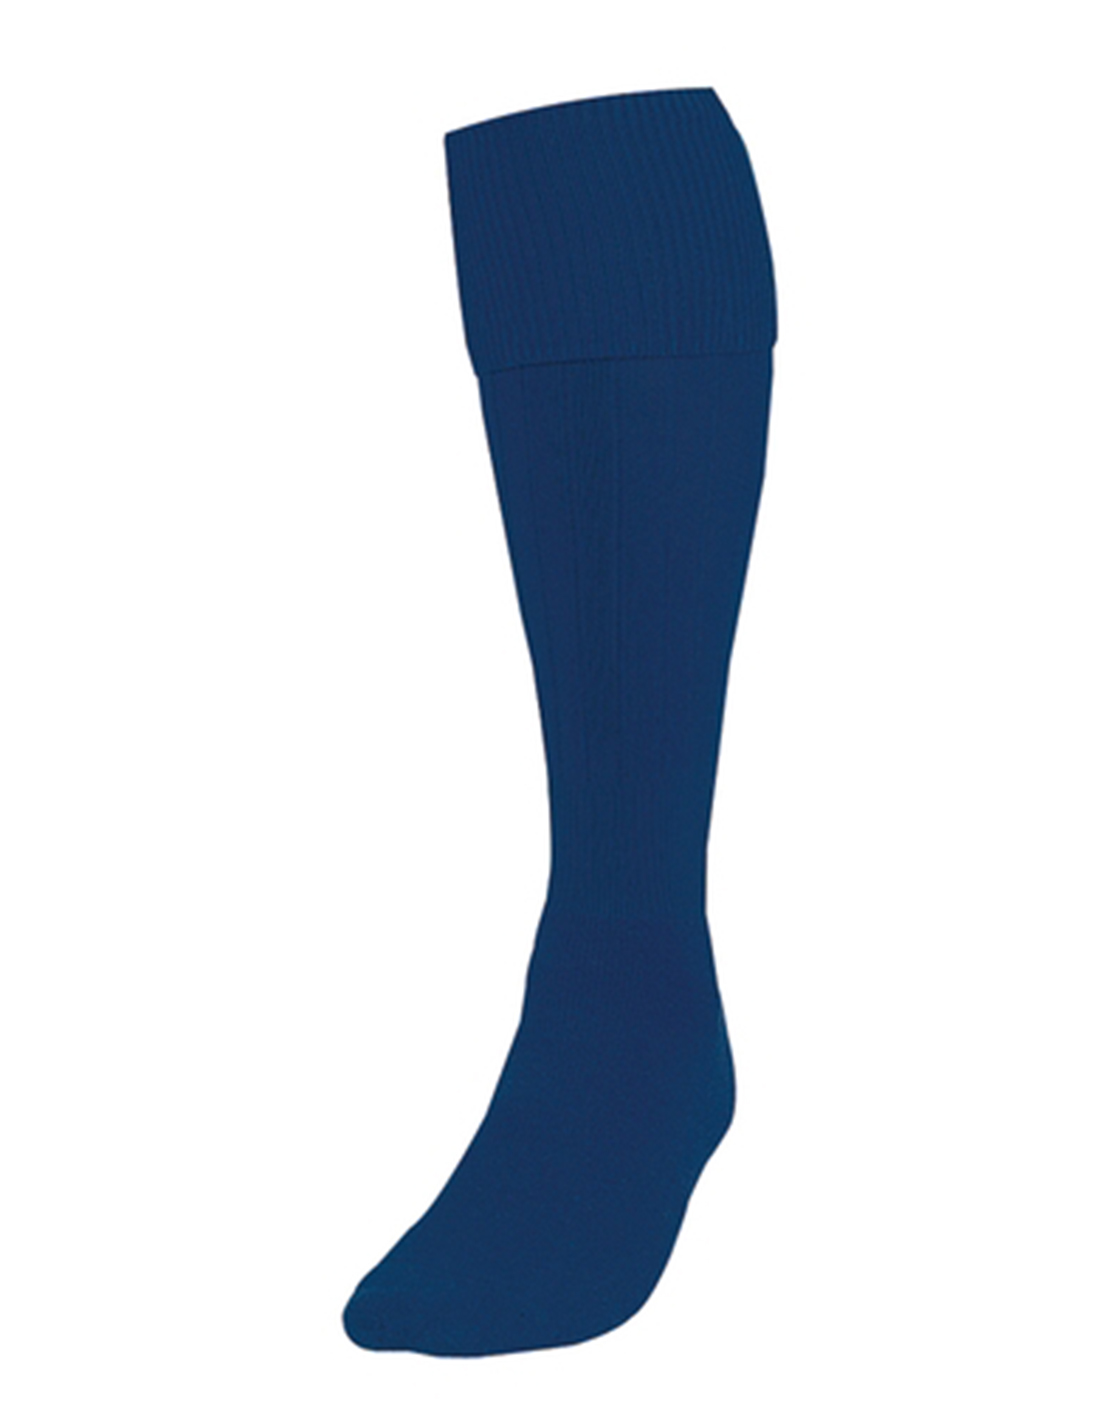 PE Games Socks - Sabre Sports Products